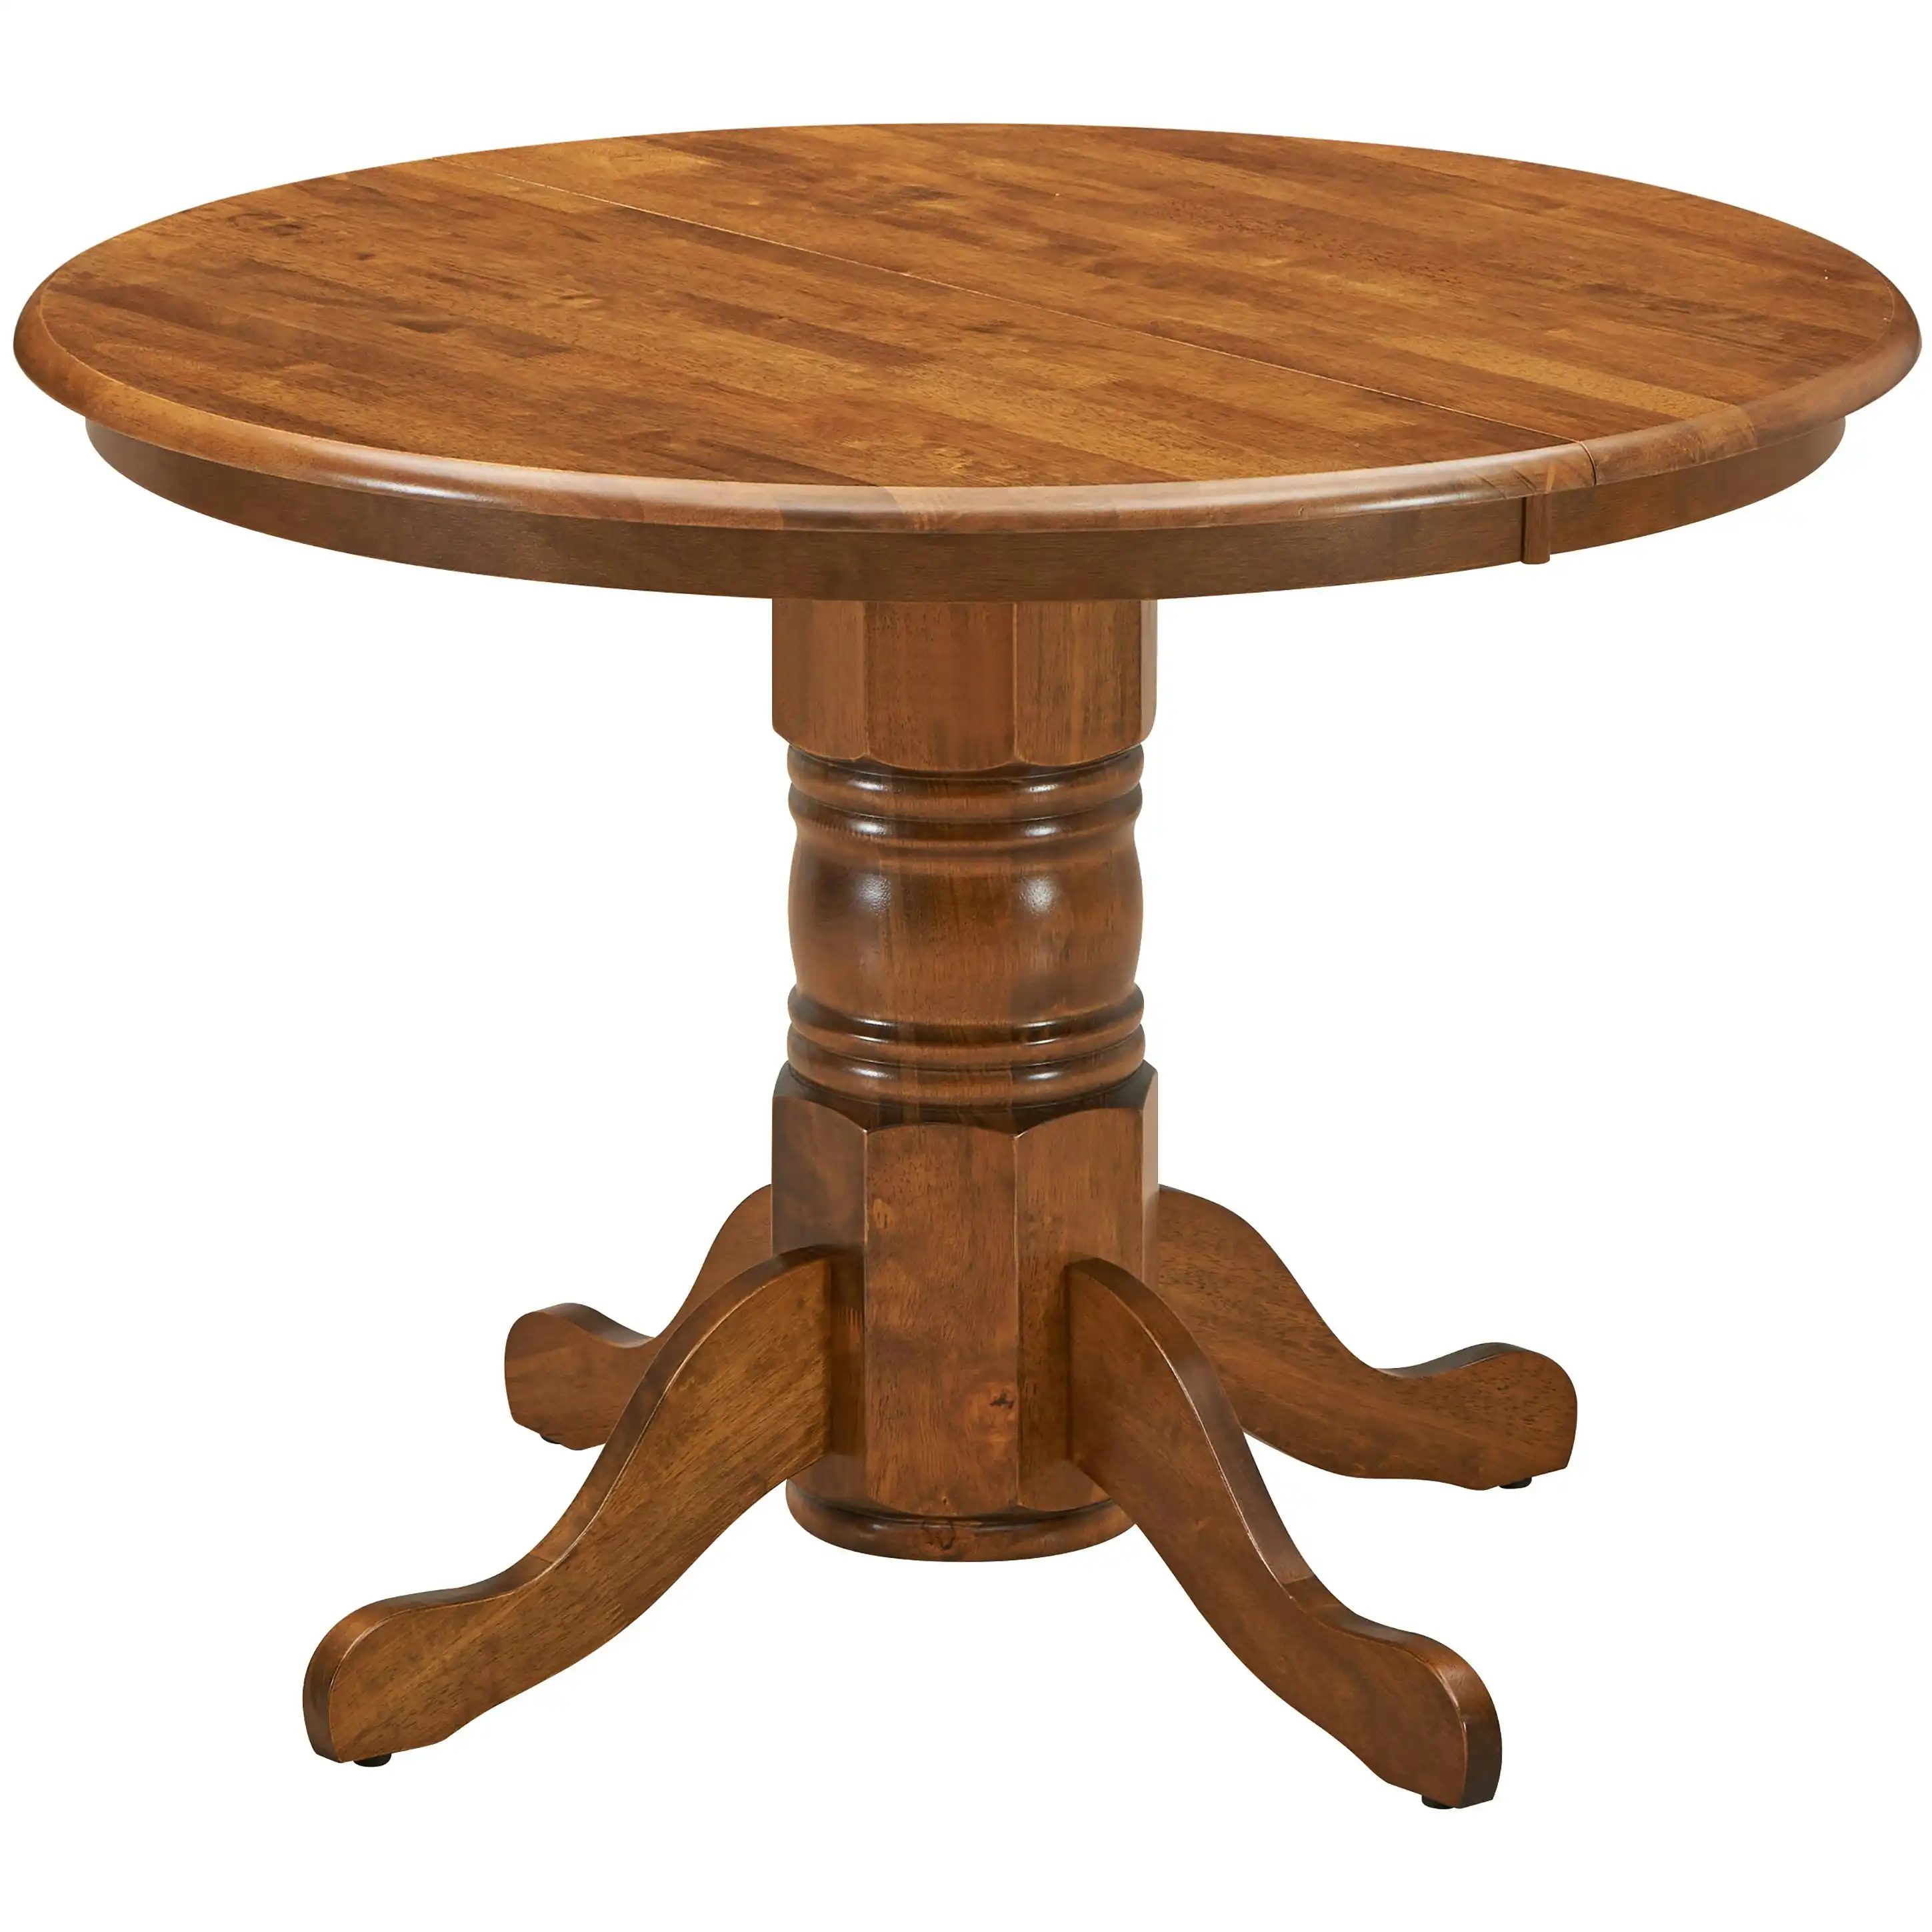 Linaria 106cm Round Dining Table